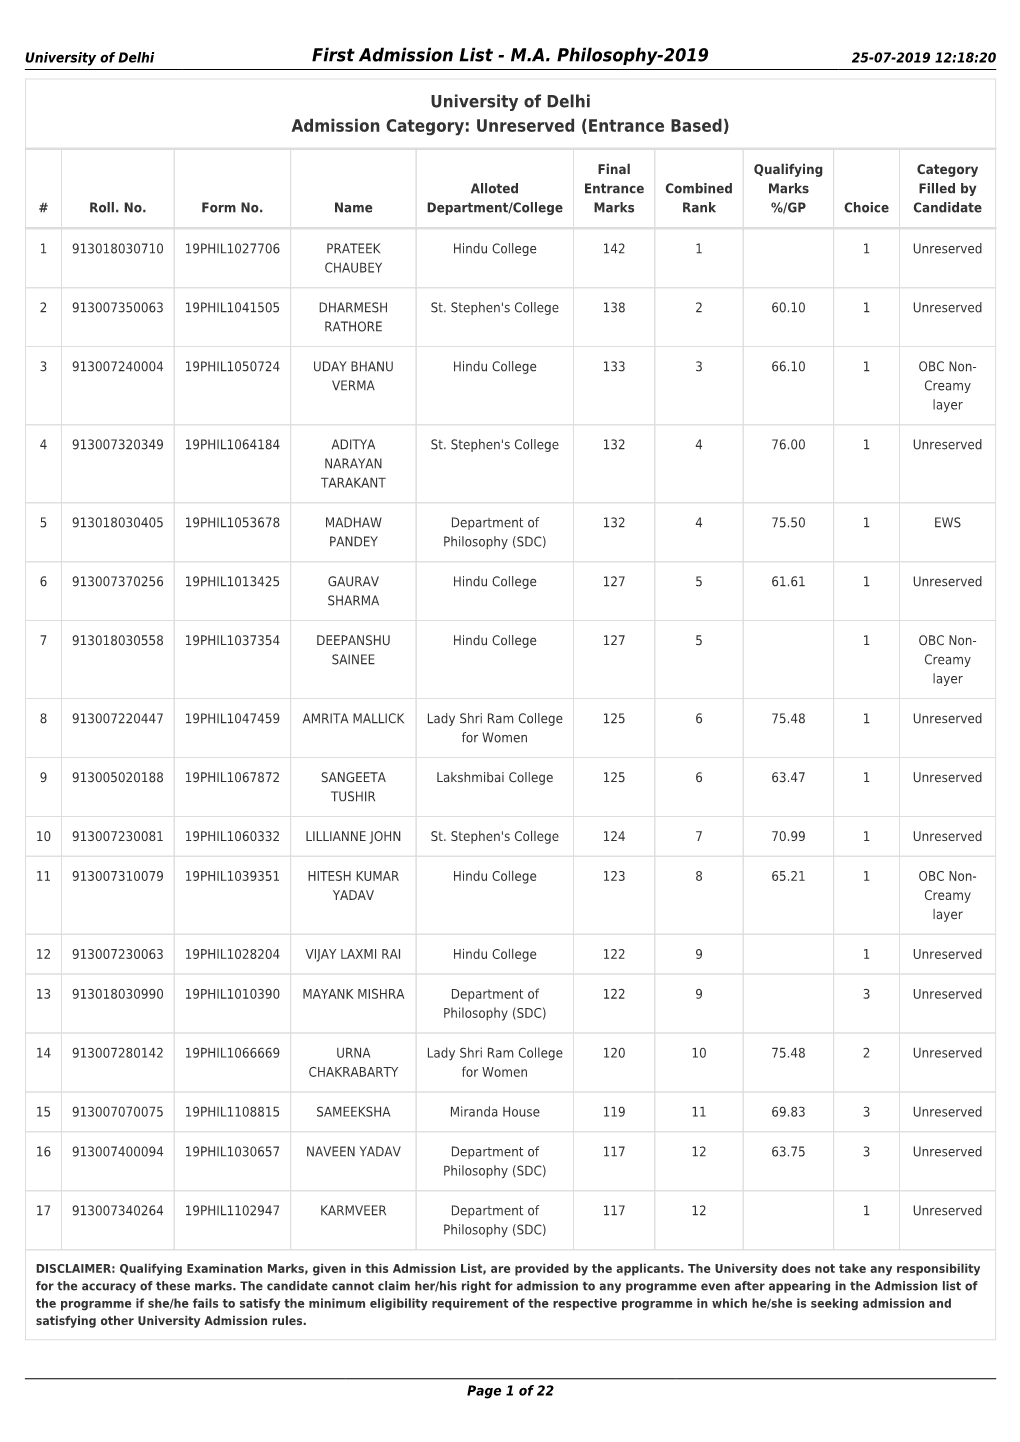 M.A. Philosophy First Admission List